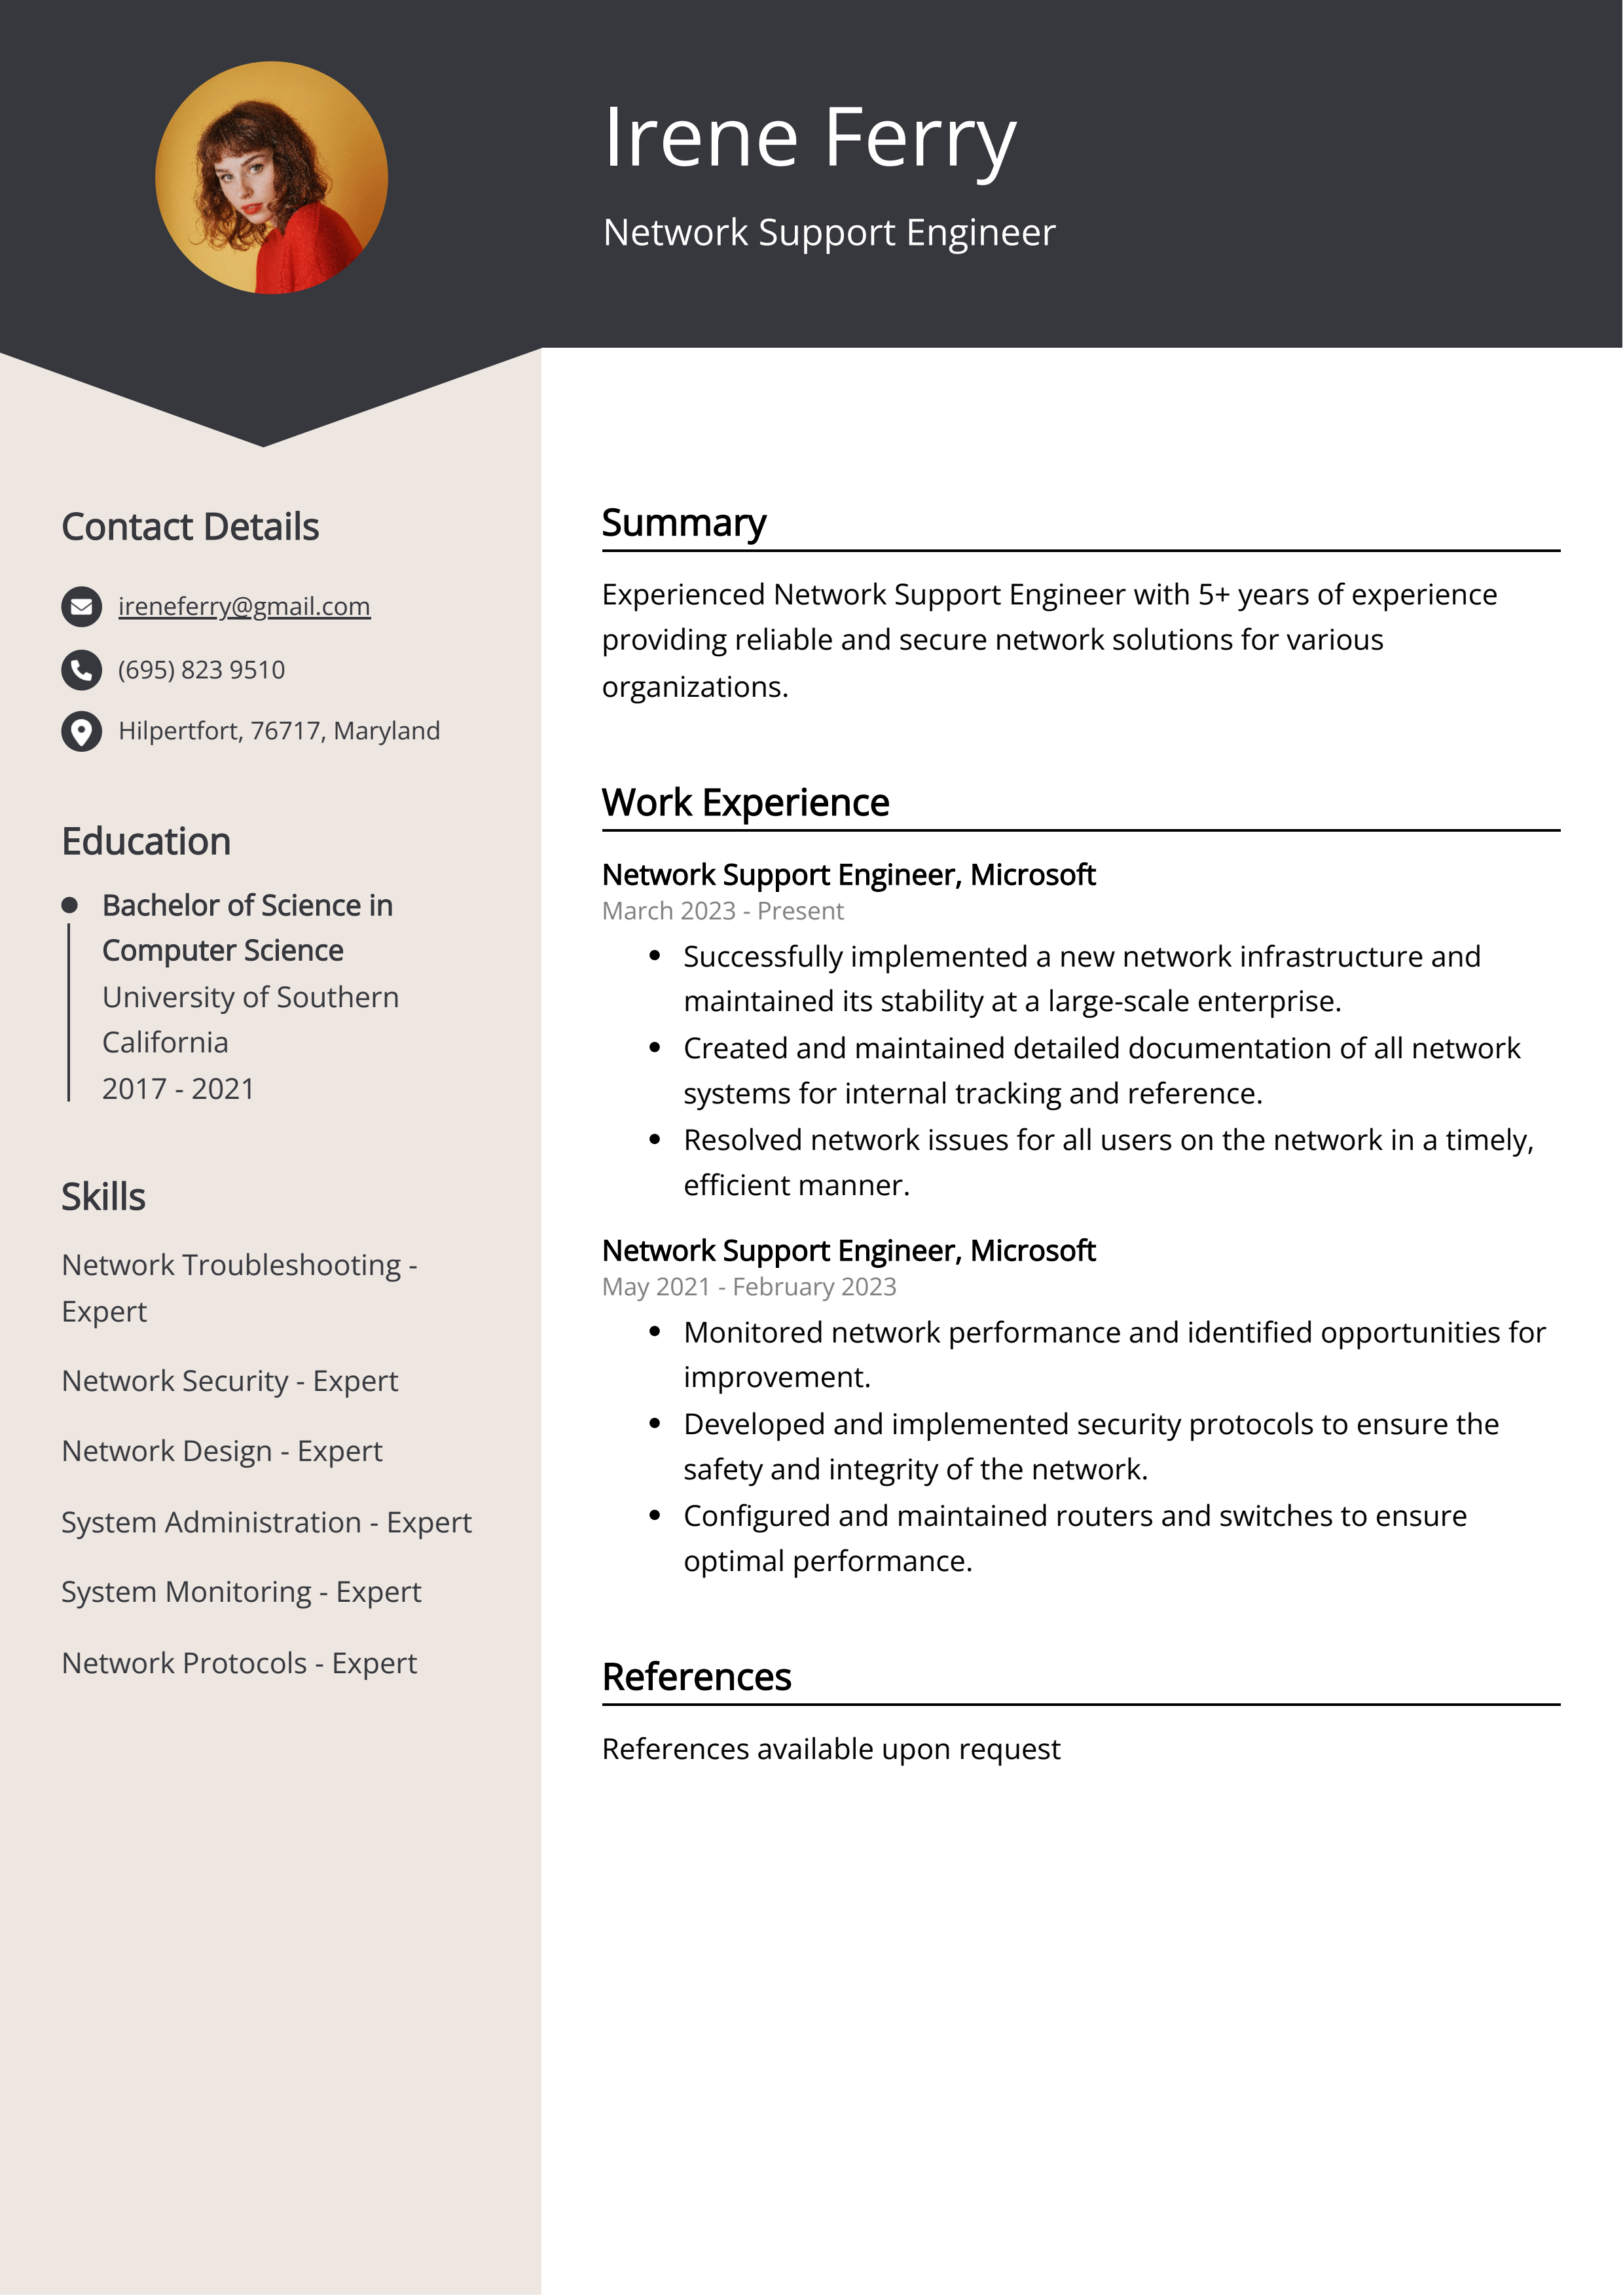 Network Support Engineer CV Example